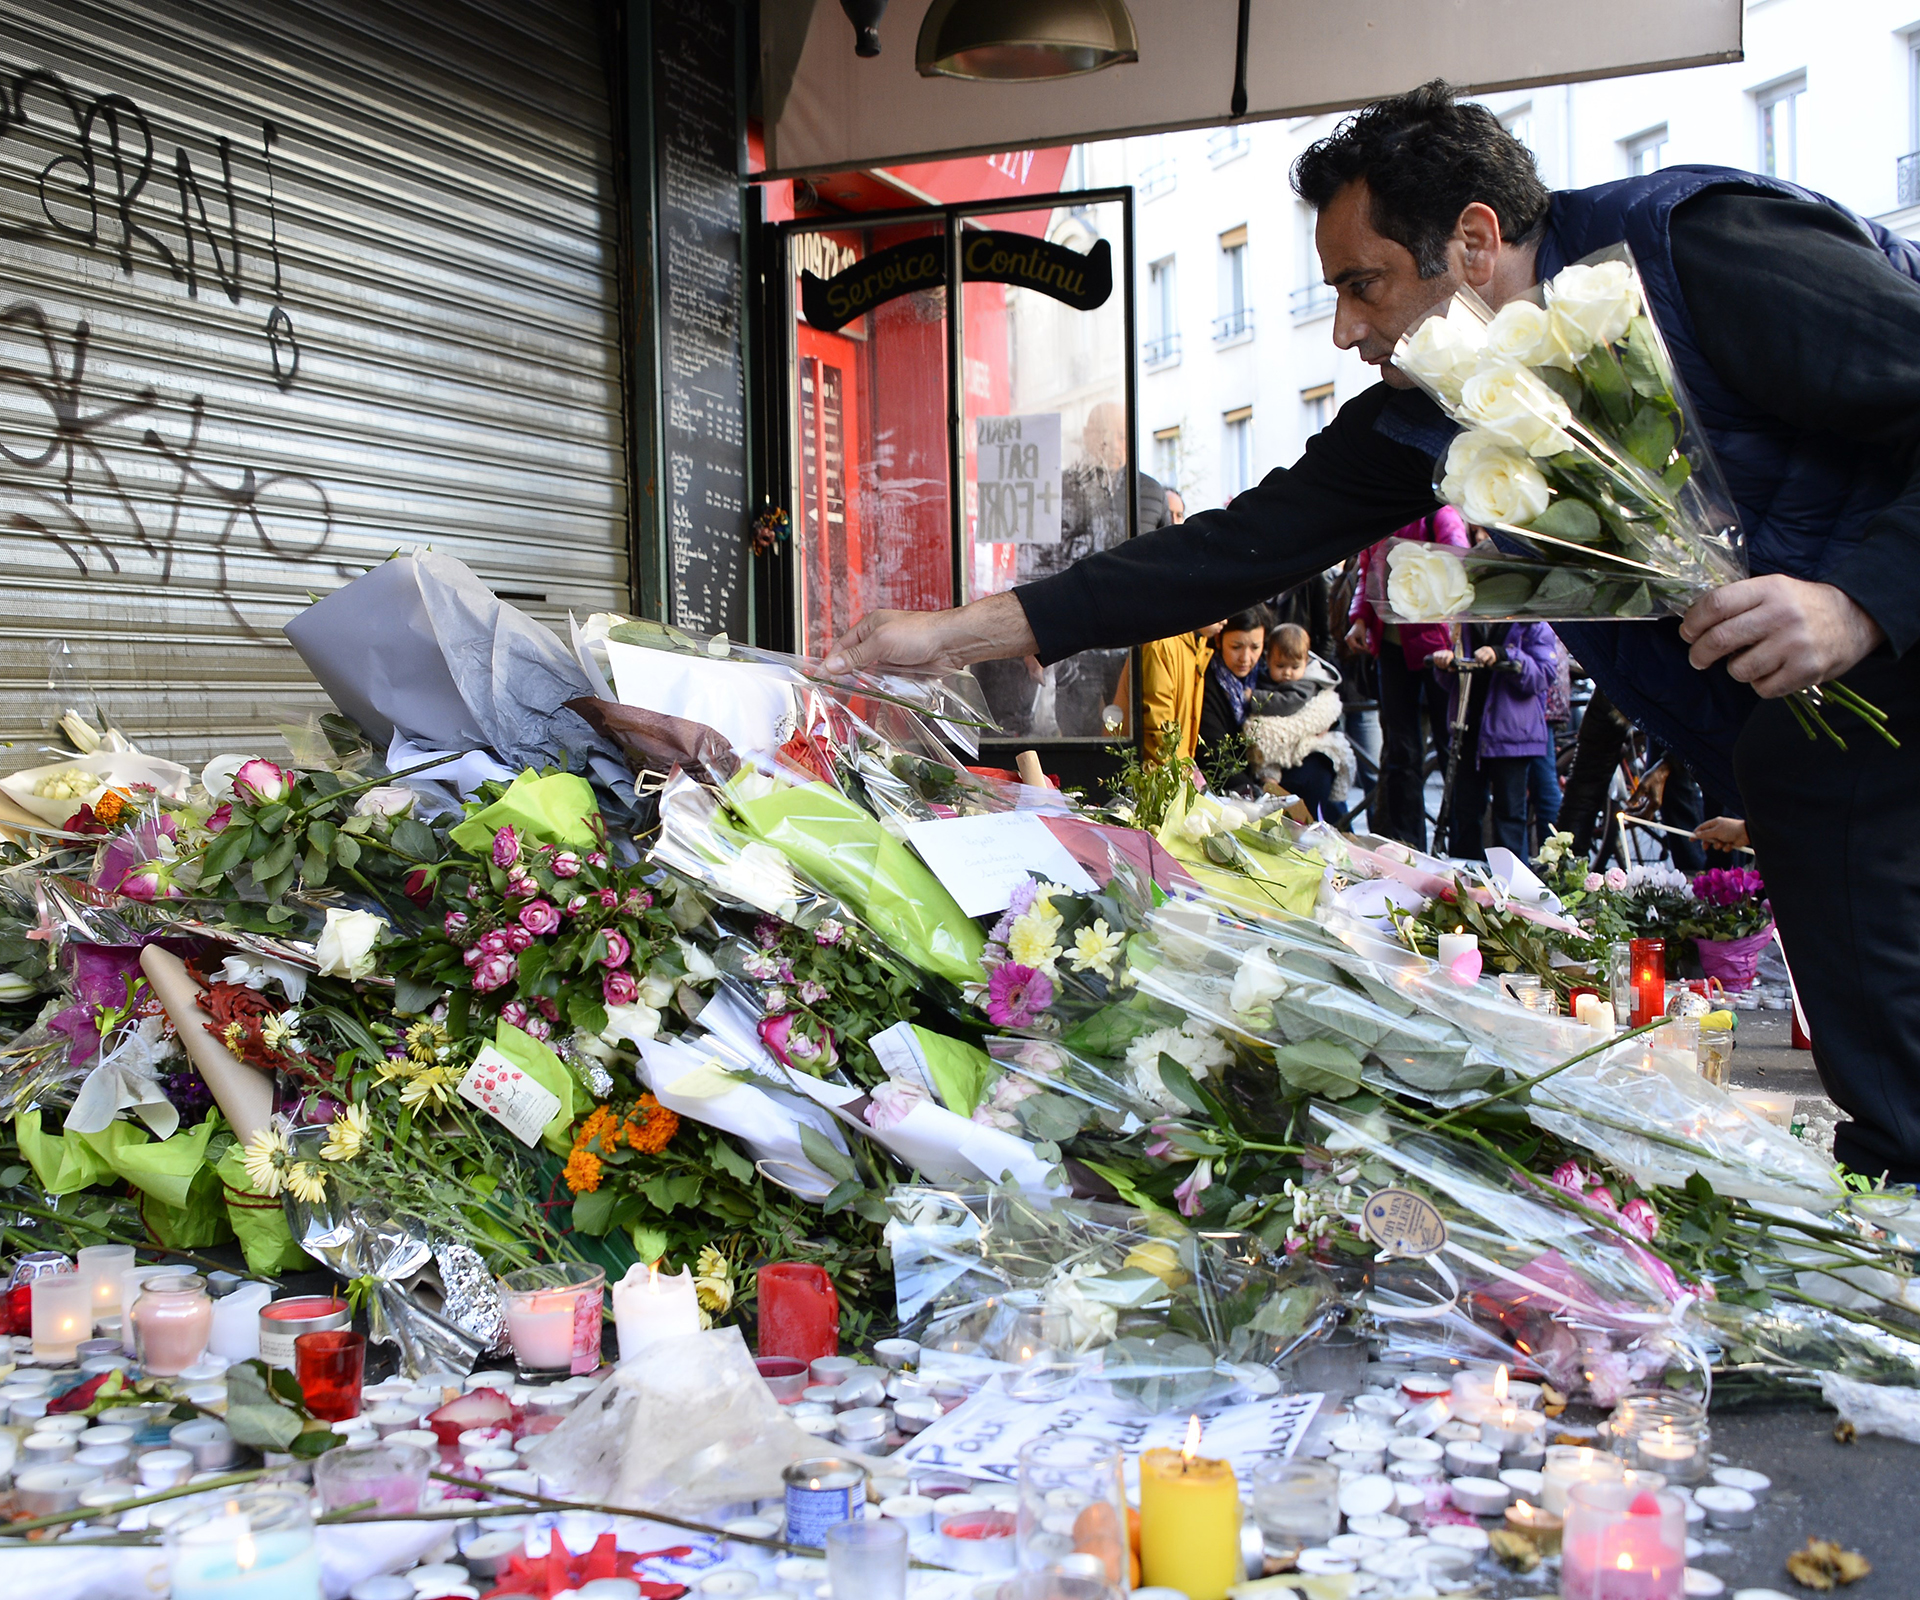 Paris attack survivor speaks: ‘There was no chance of anyone being a hero’